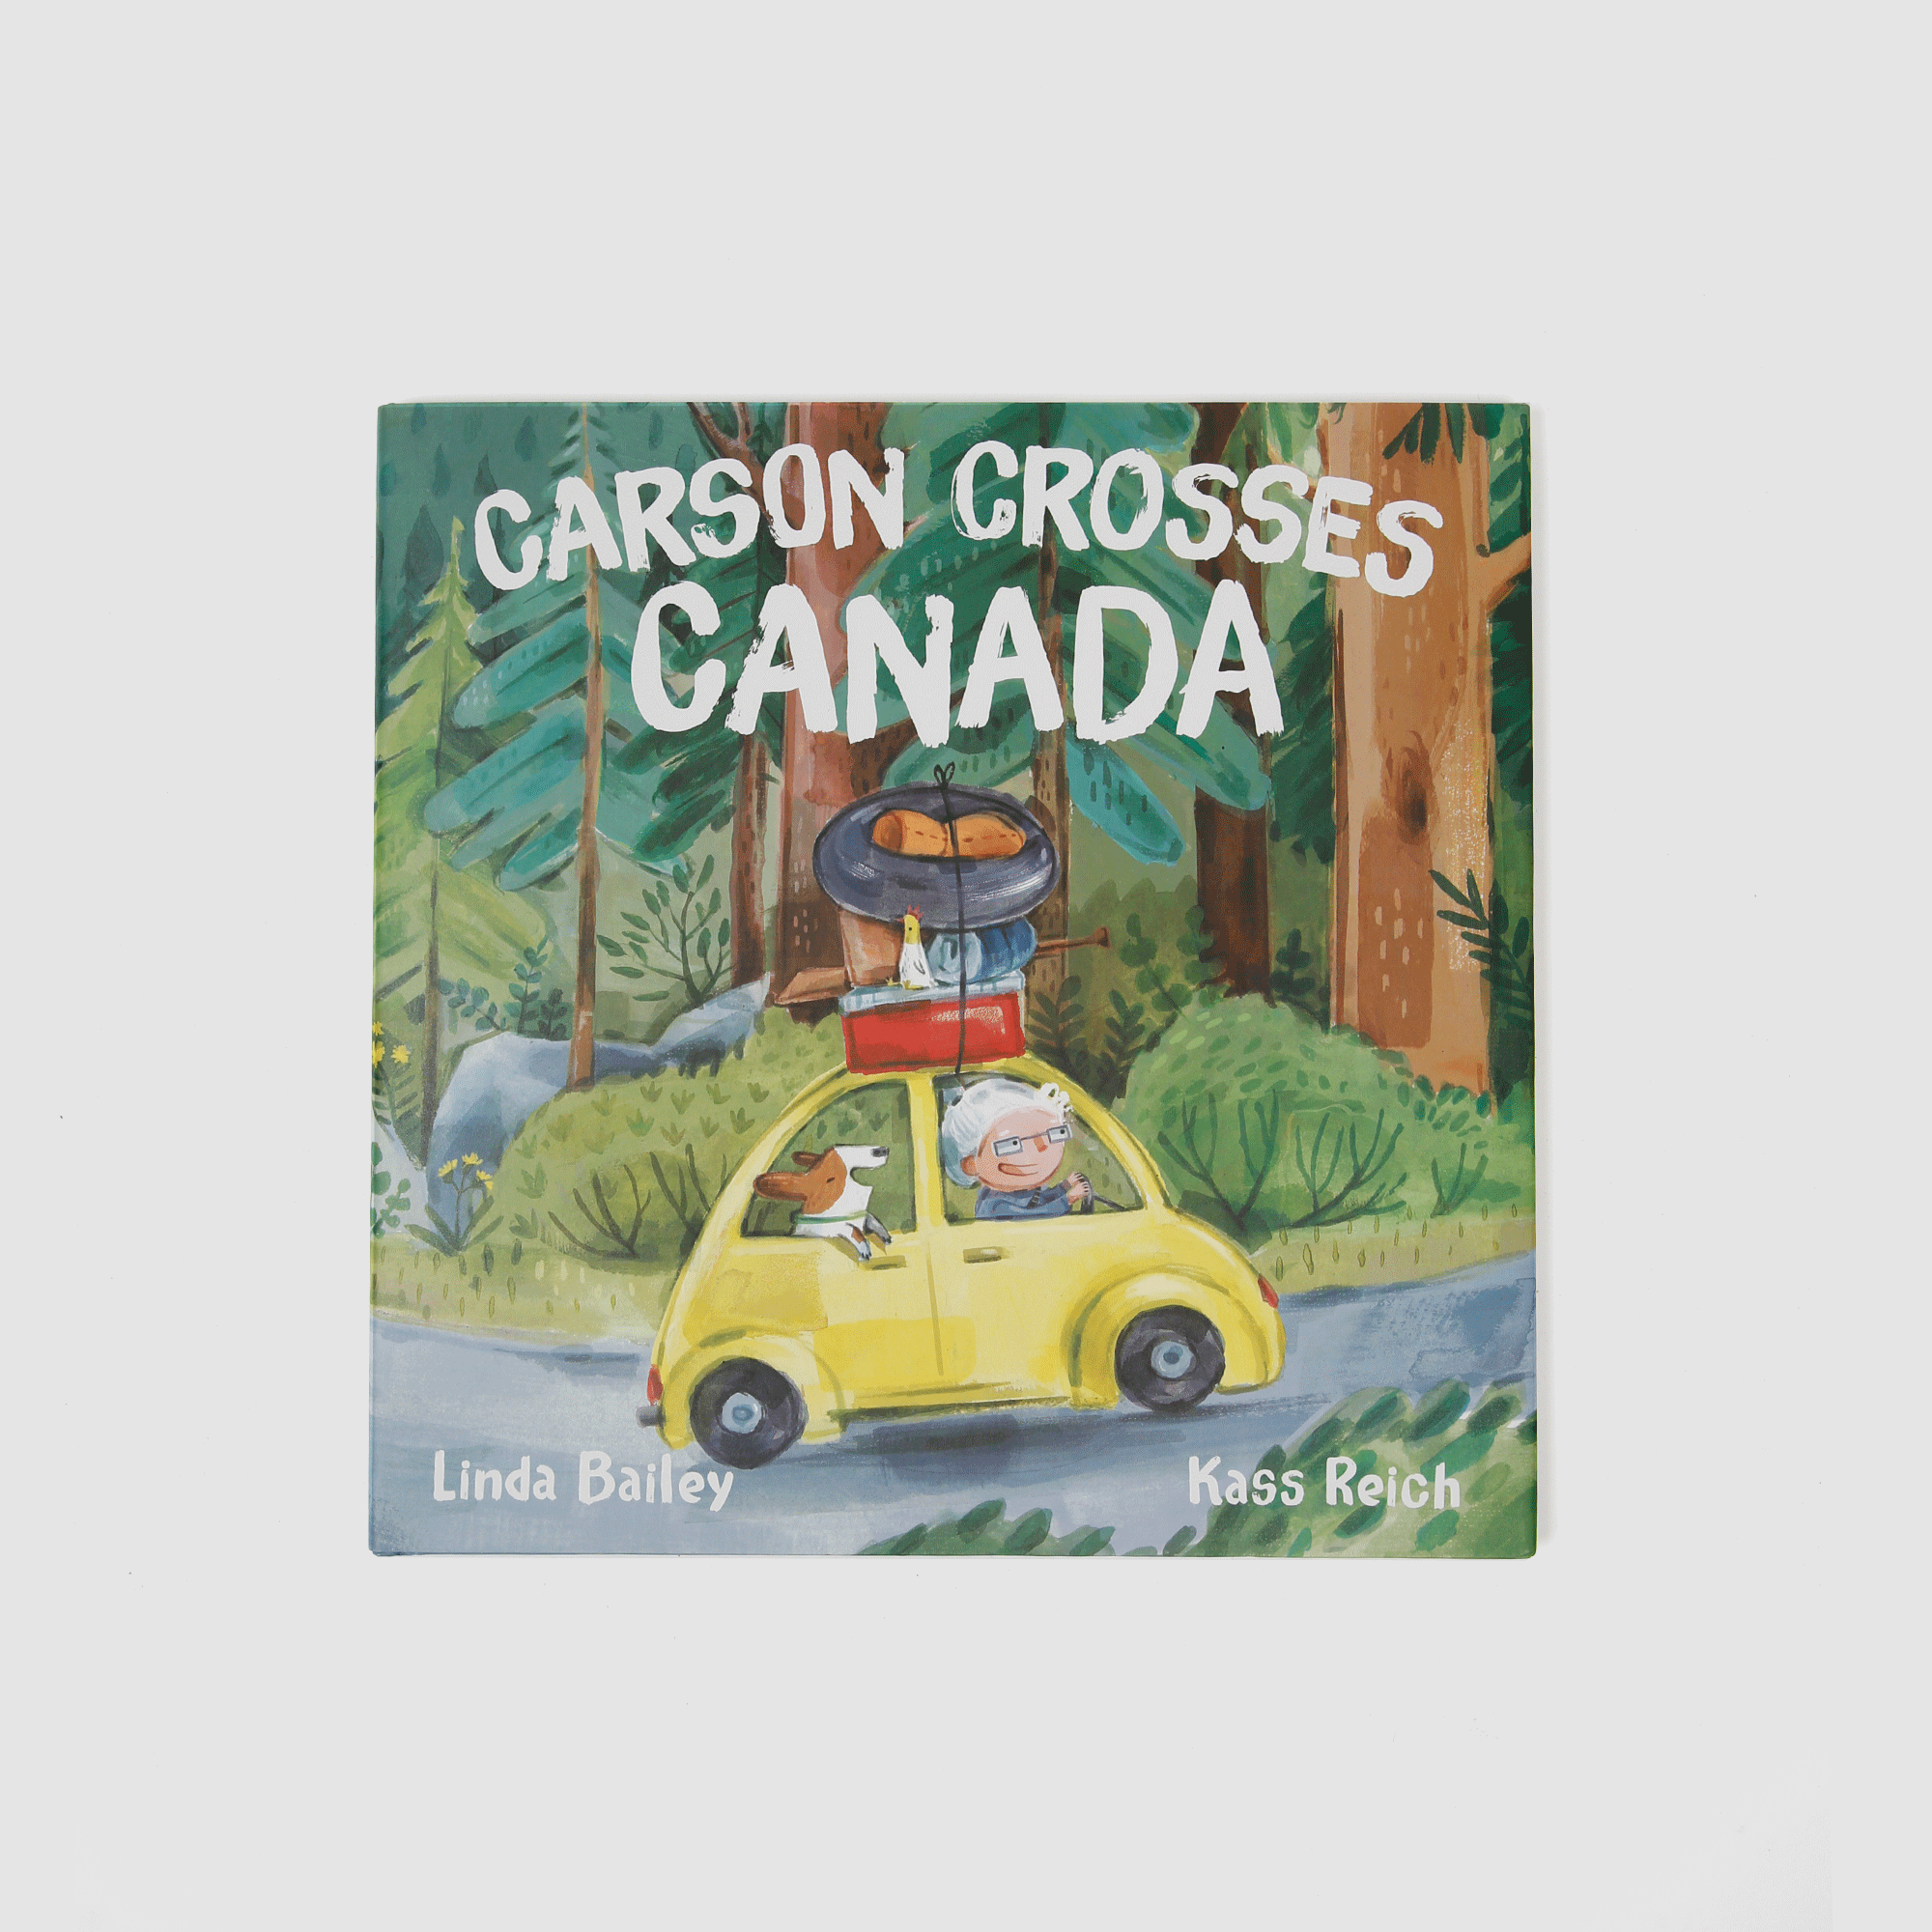 Carson Crosses Canada by Linda Bailey & Kass Reich